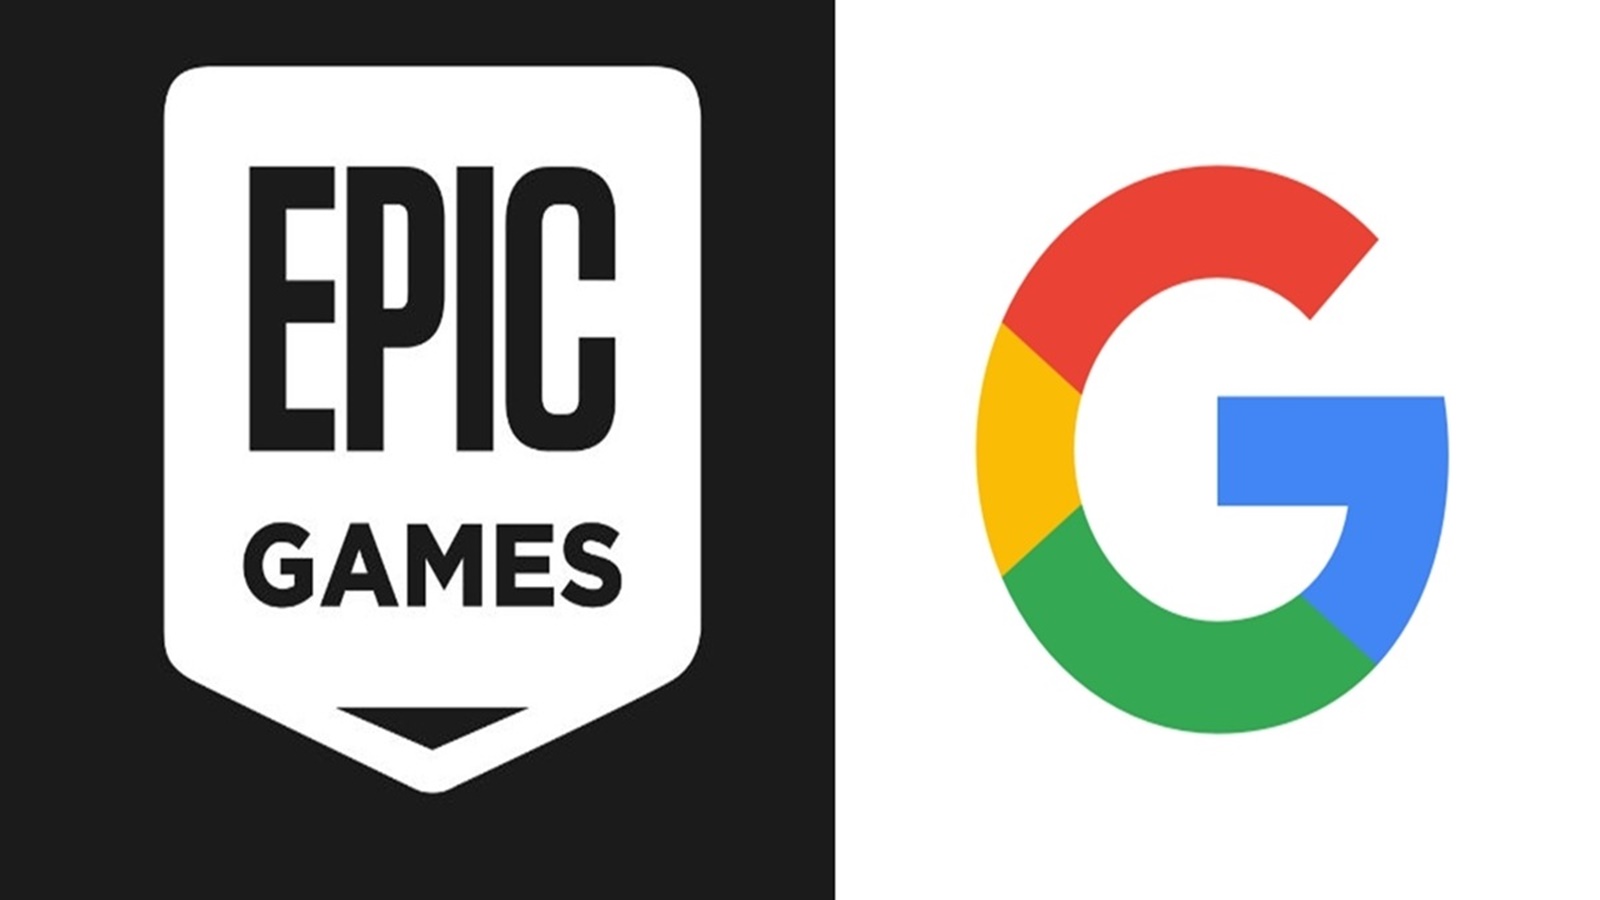 Google's court loss to Epic Games may cost billions but final outcome years  away